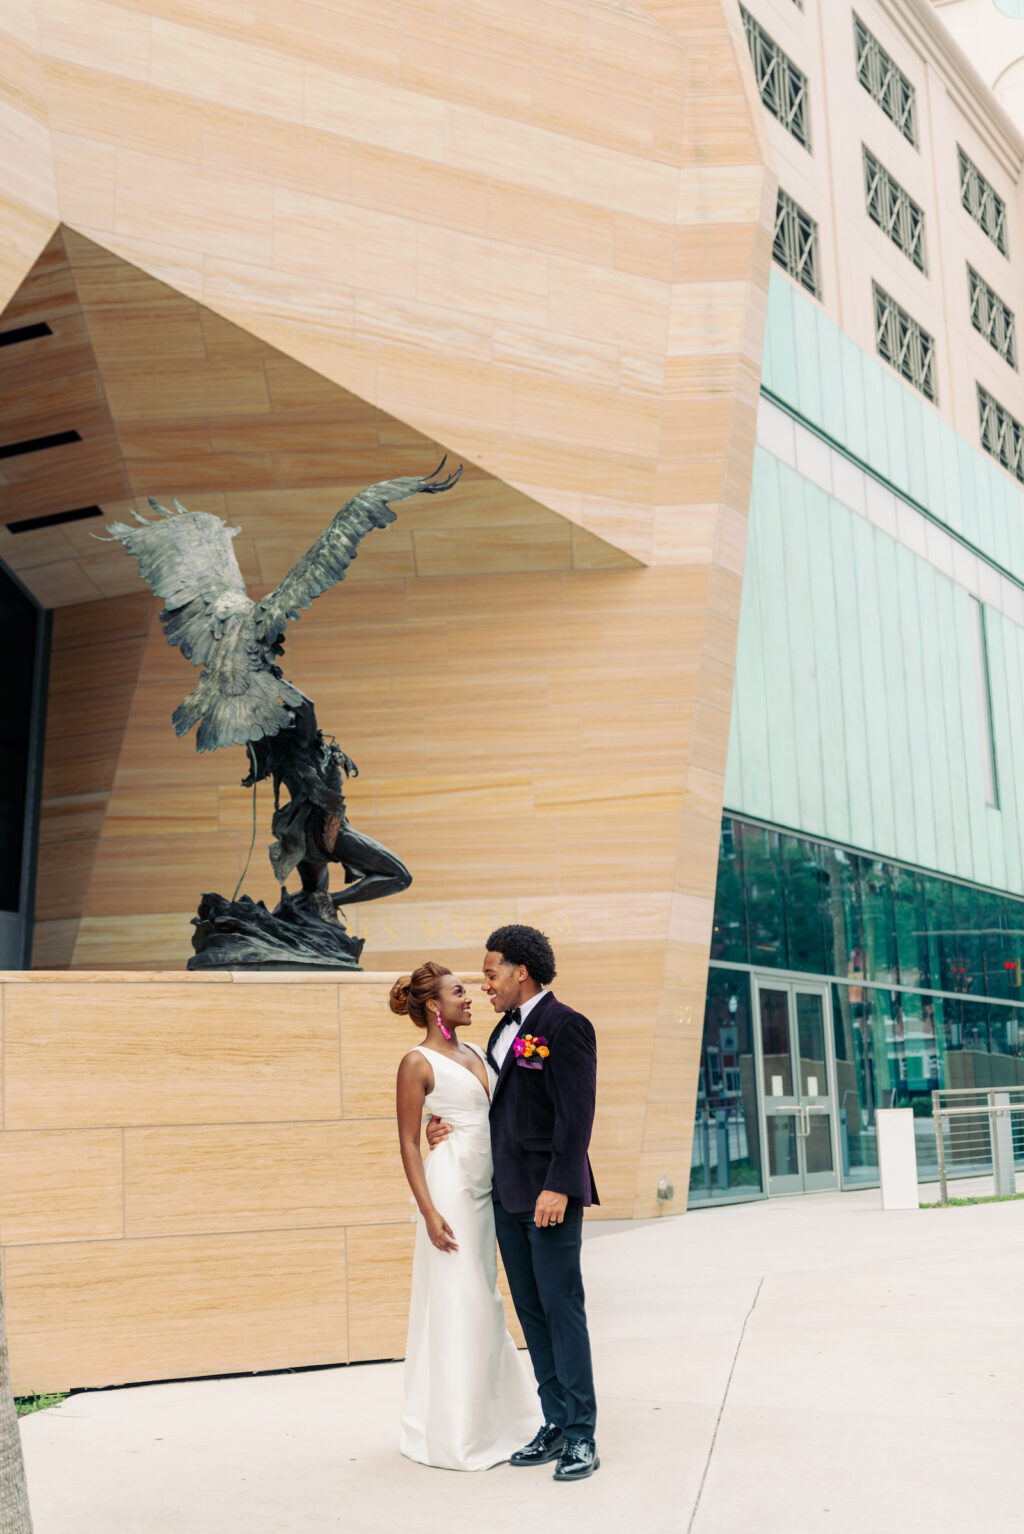 Modern Bride Wearing Classic Plunging V Neckline Wedding Dress Holding Groom Wearing Black Tuxedo and Colorful Floral Boutonniere | Tampa Bay Wedding Photographer Dewitt for Love